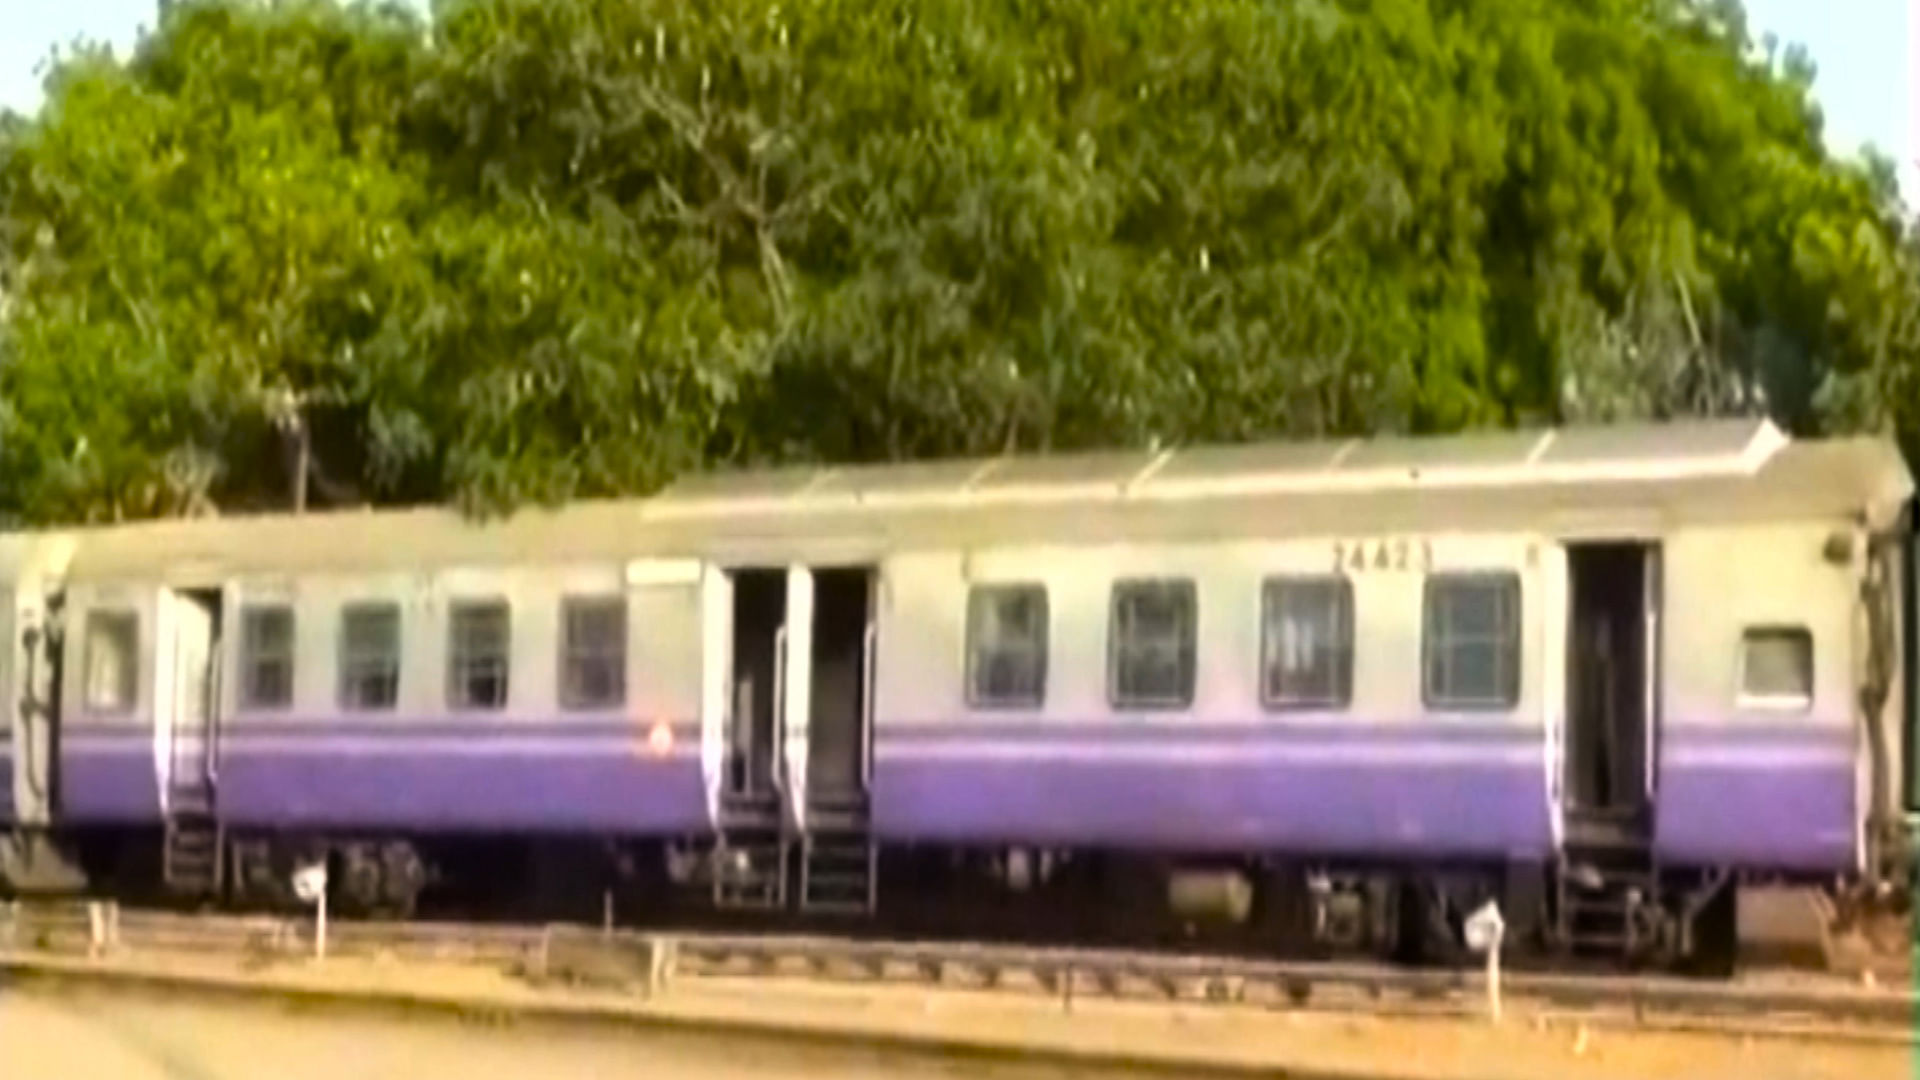 Train coach with solar panels fitted on the roof. (Photo: ANI Screengrab)